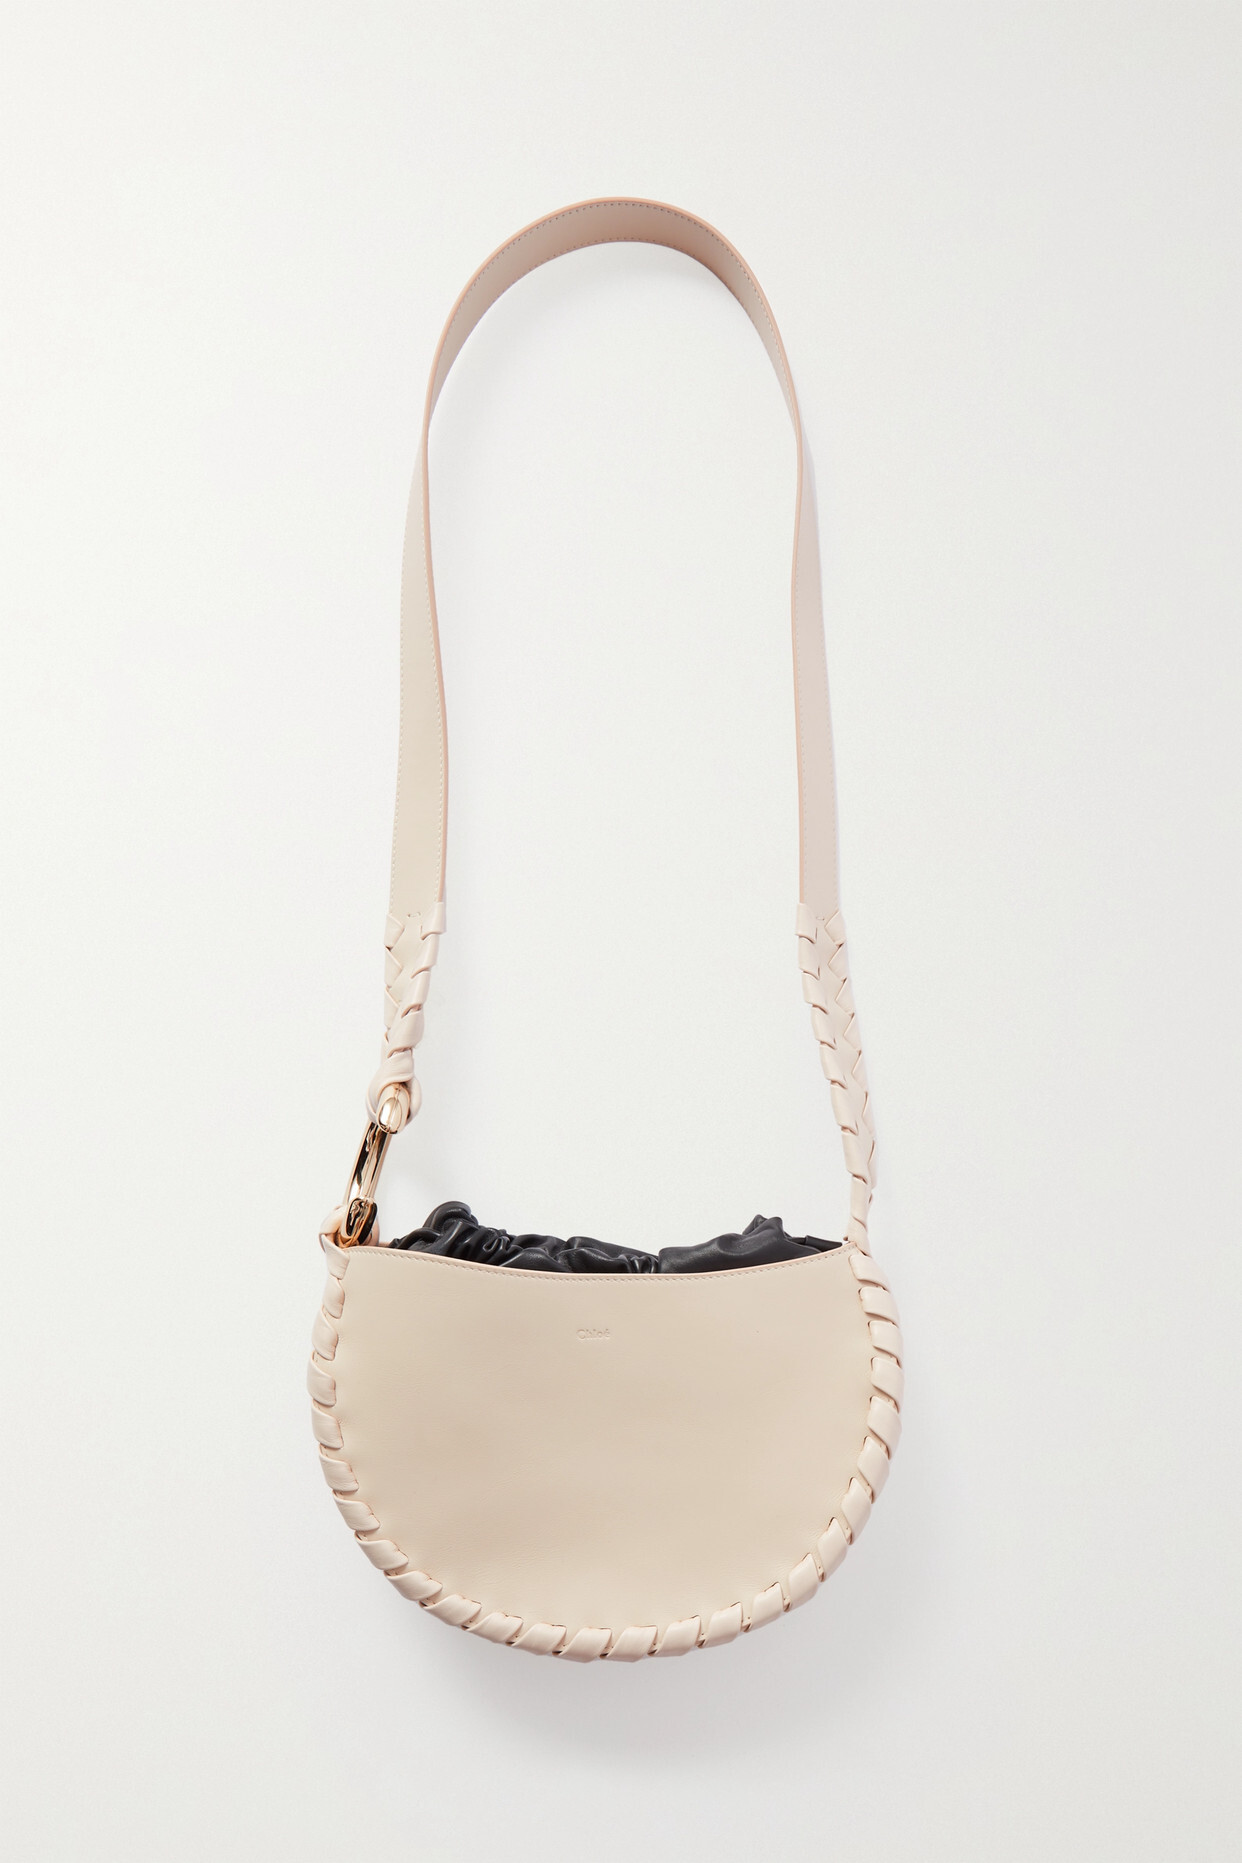 Chloé Chloé - Mate Small Whipstitched Leather Shoulder Bag - Neutrals